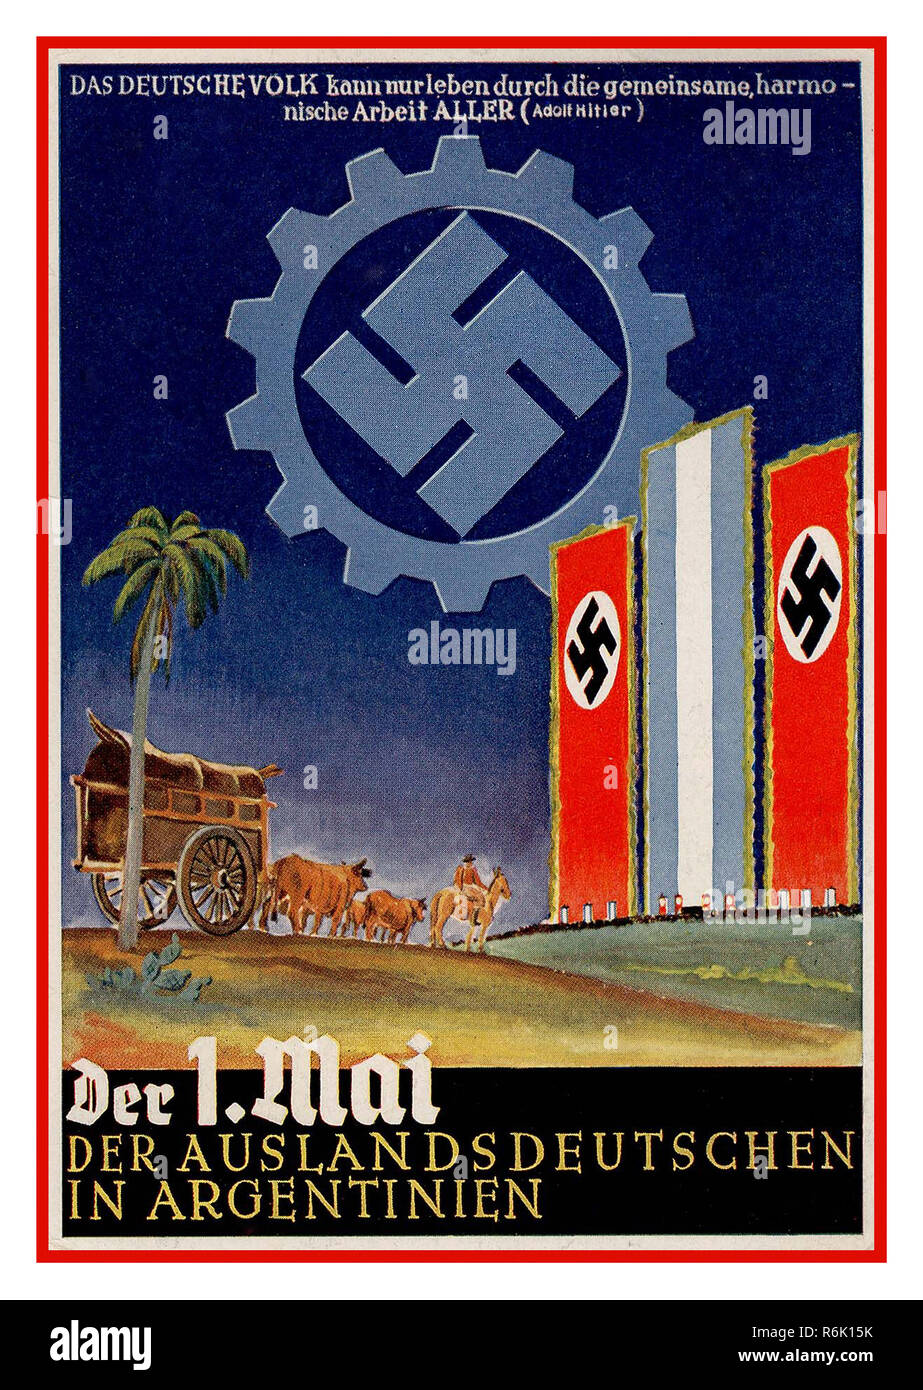 Vintage Nazi 1936 Swastika Poster Propaganda 'May 1st for Germans abroad in Argentina'  A German poster giving recognition to the Germans of distant lands, or 'Auslandeutschen'. This poster is in commemoration of the many ethnic Germans living in the South American country of Argentina 'The German People's common harmony is the work of all...’ Adolf Hitler 1936 Stock Photo